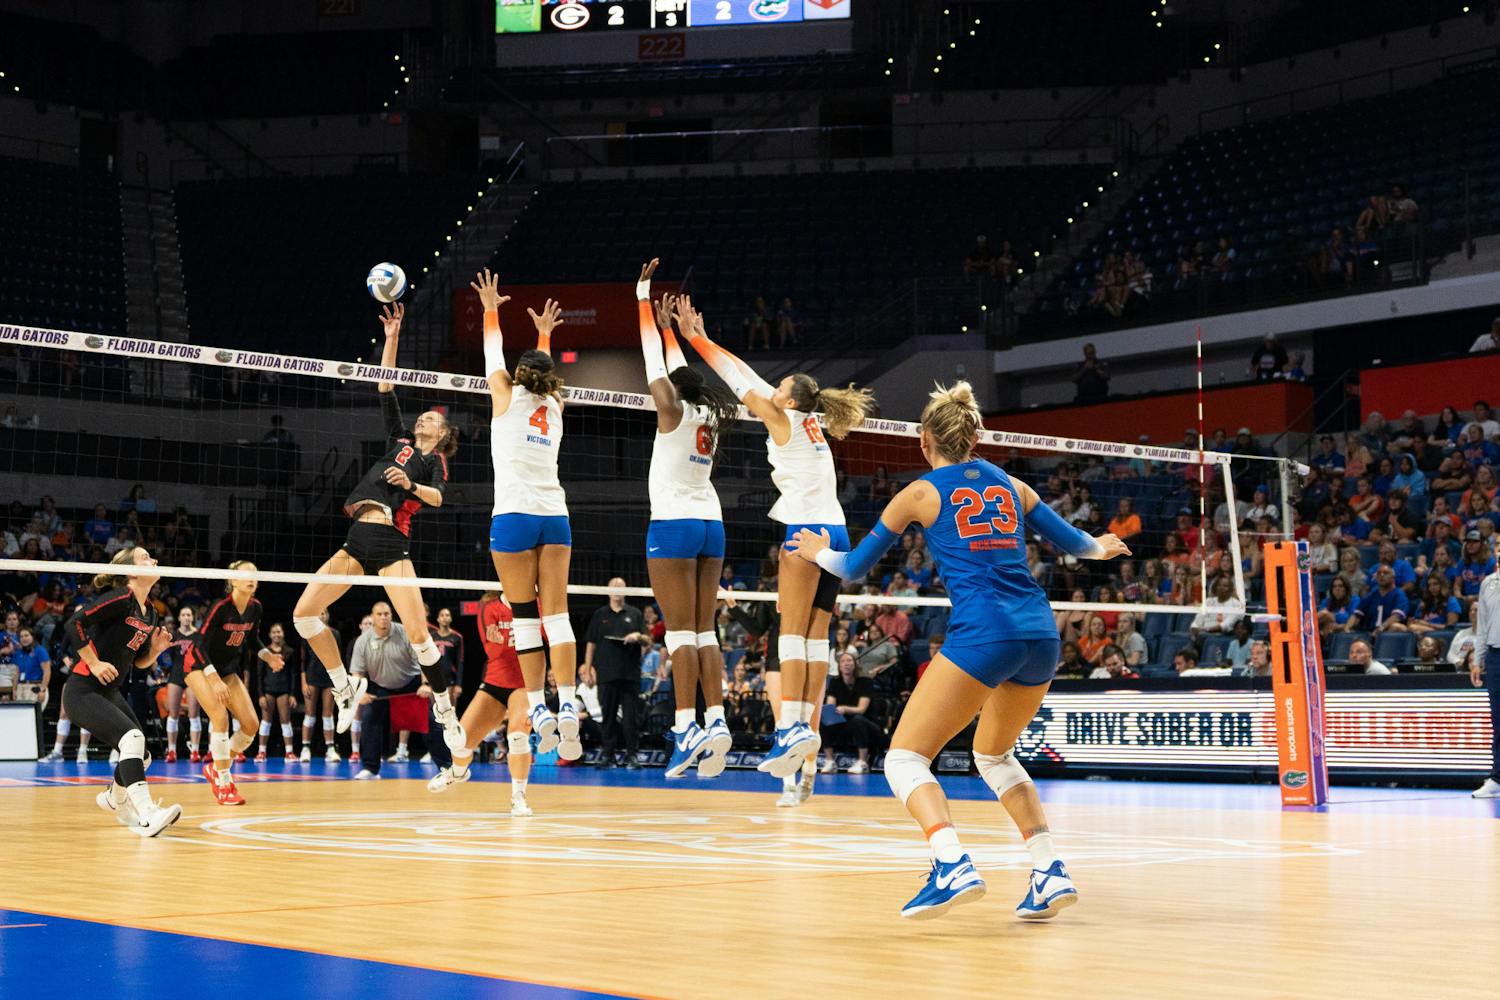 Florida sets up its defense in the Gators’ 3-2 win against the Georgia Bulldogs on Sunday, Sept. 24, 2023.